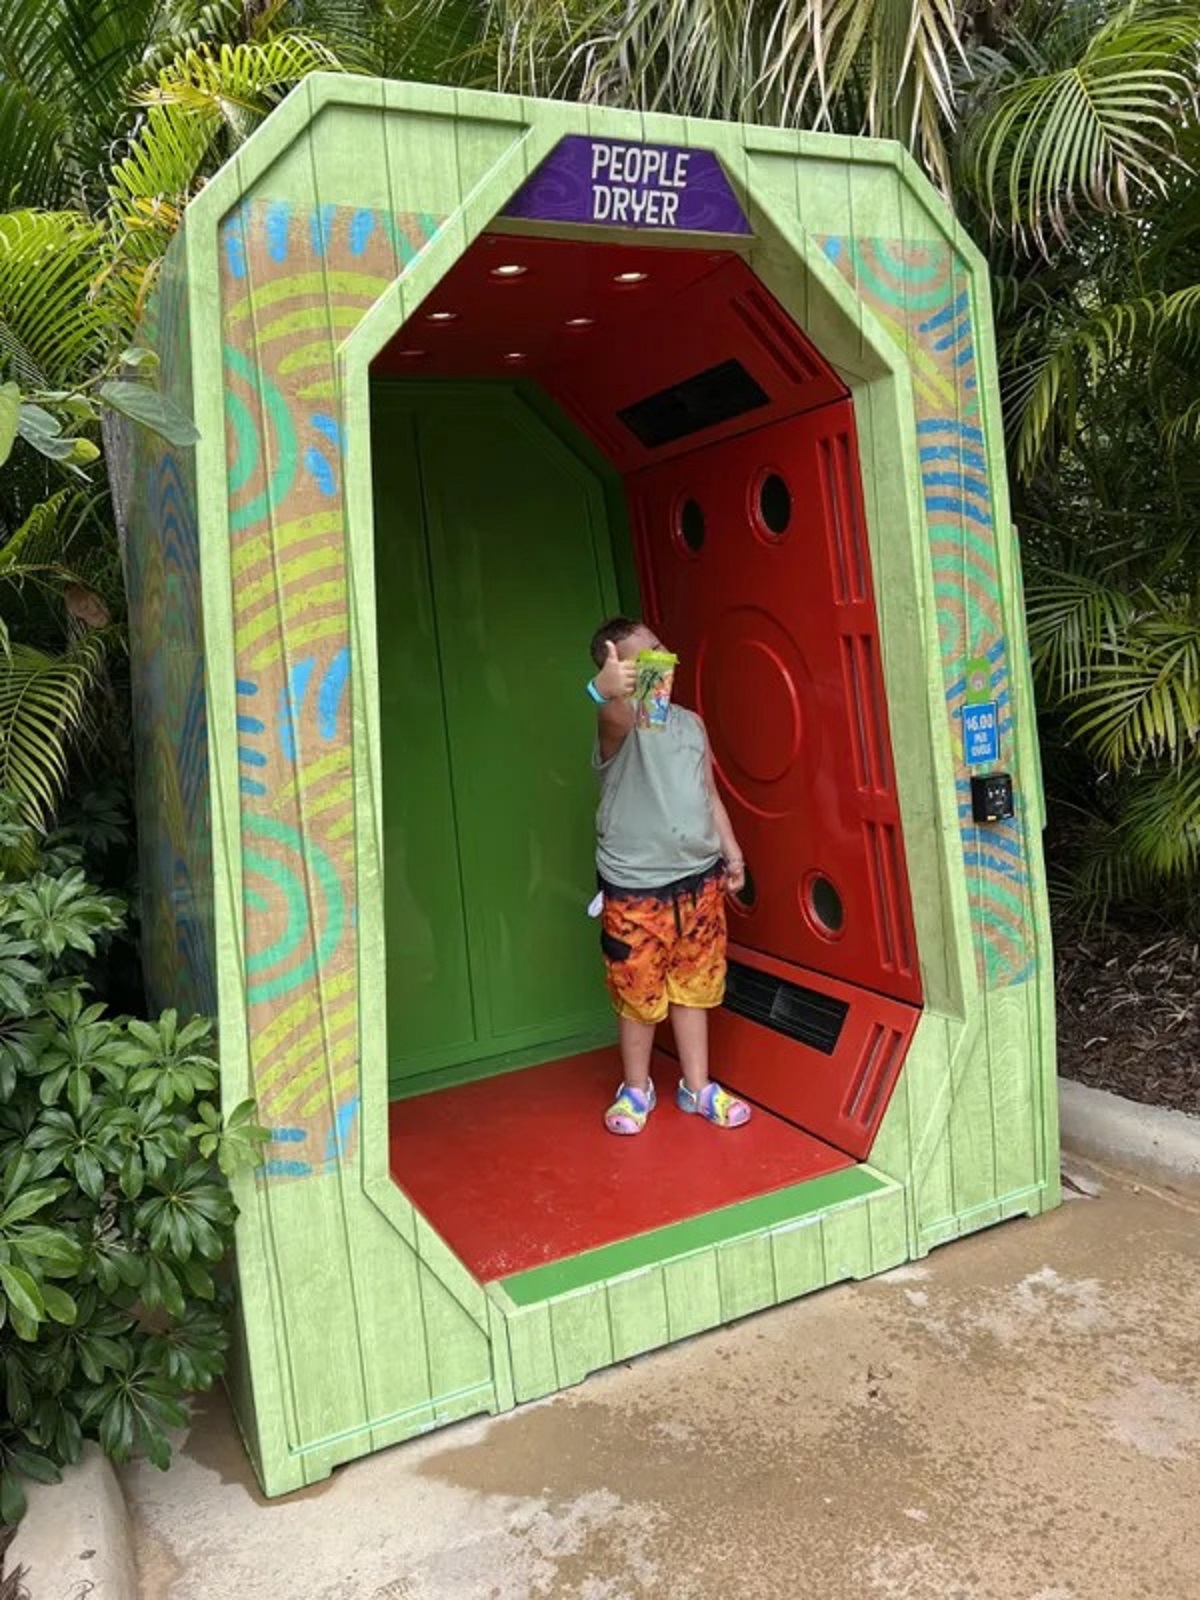 This “People Dryer” at Orlando’s Universal Studios resort – dries your body and bathing suit.